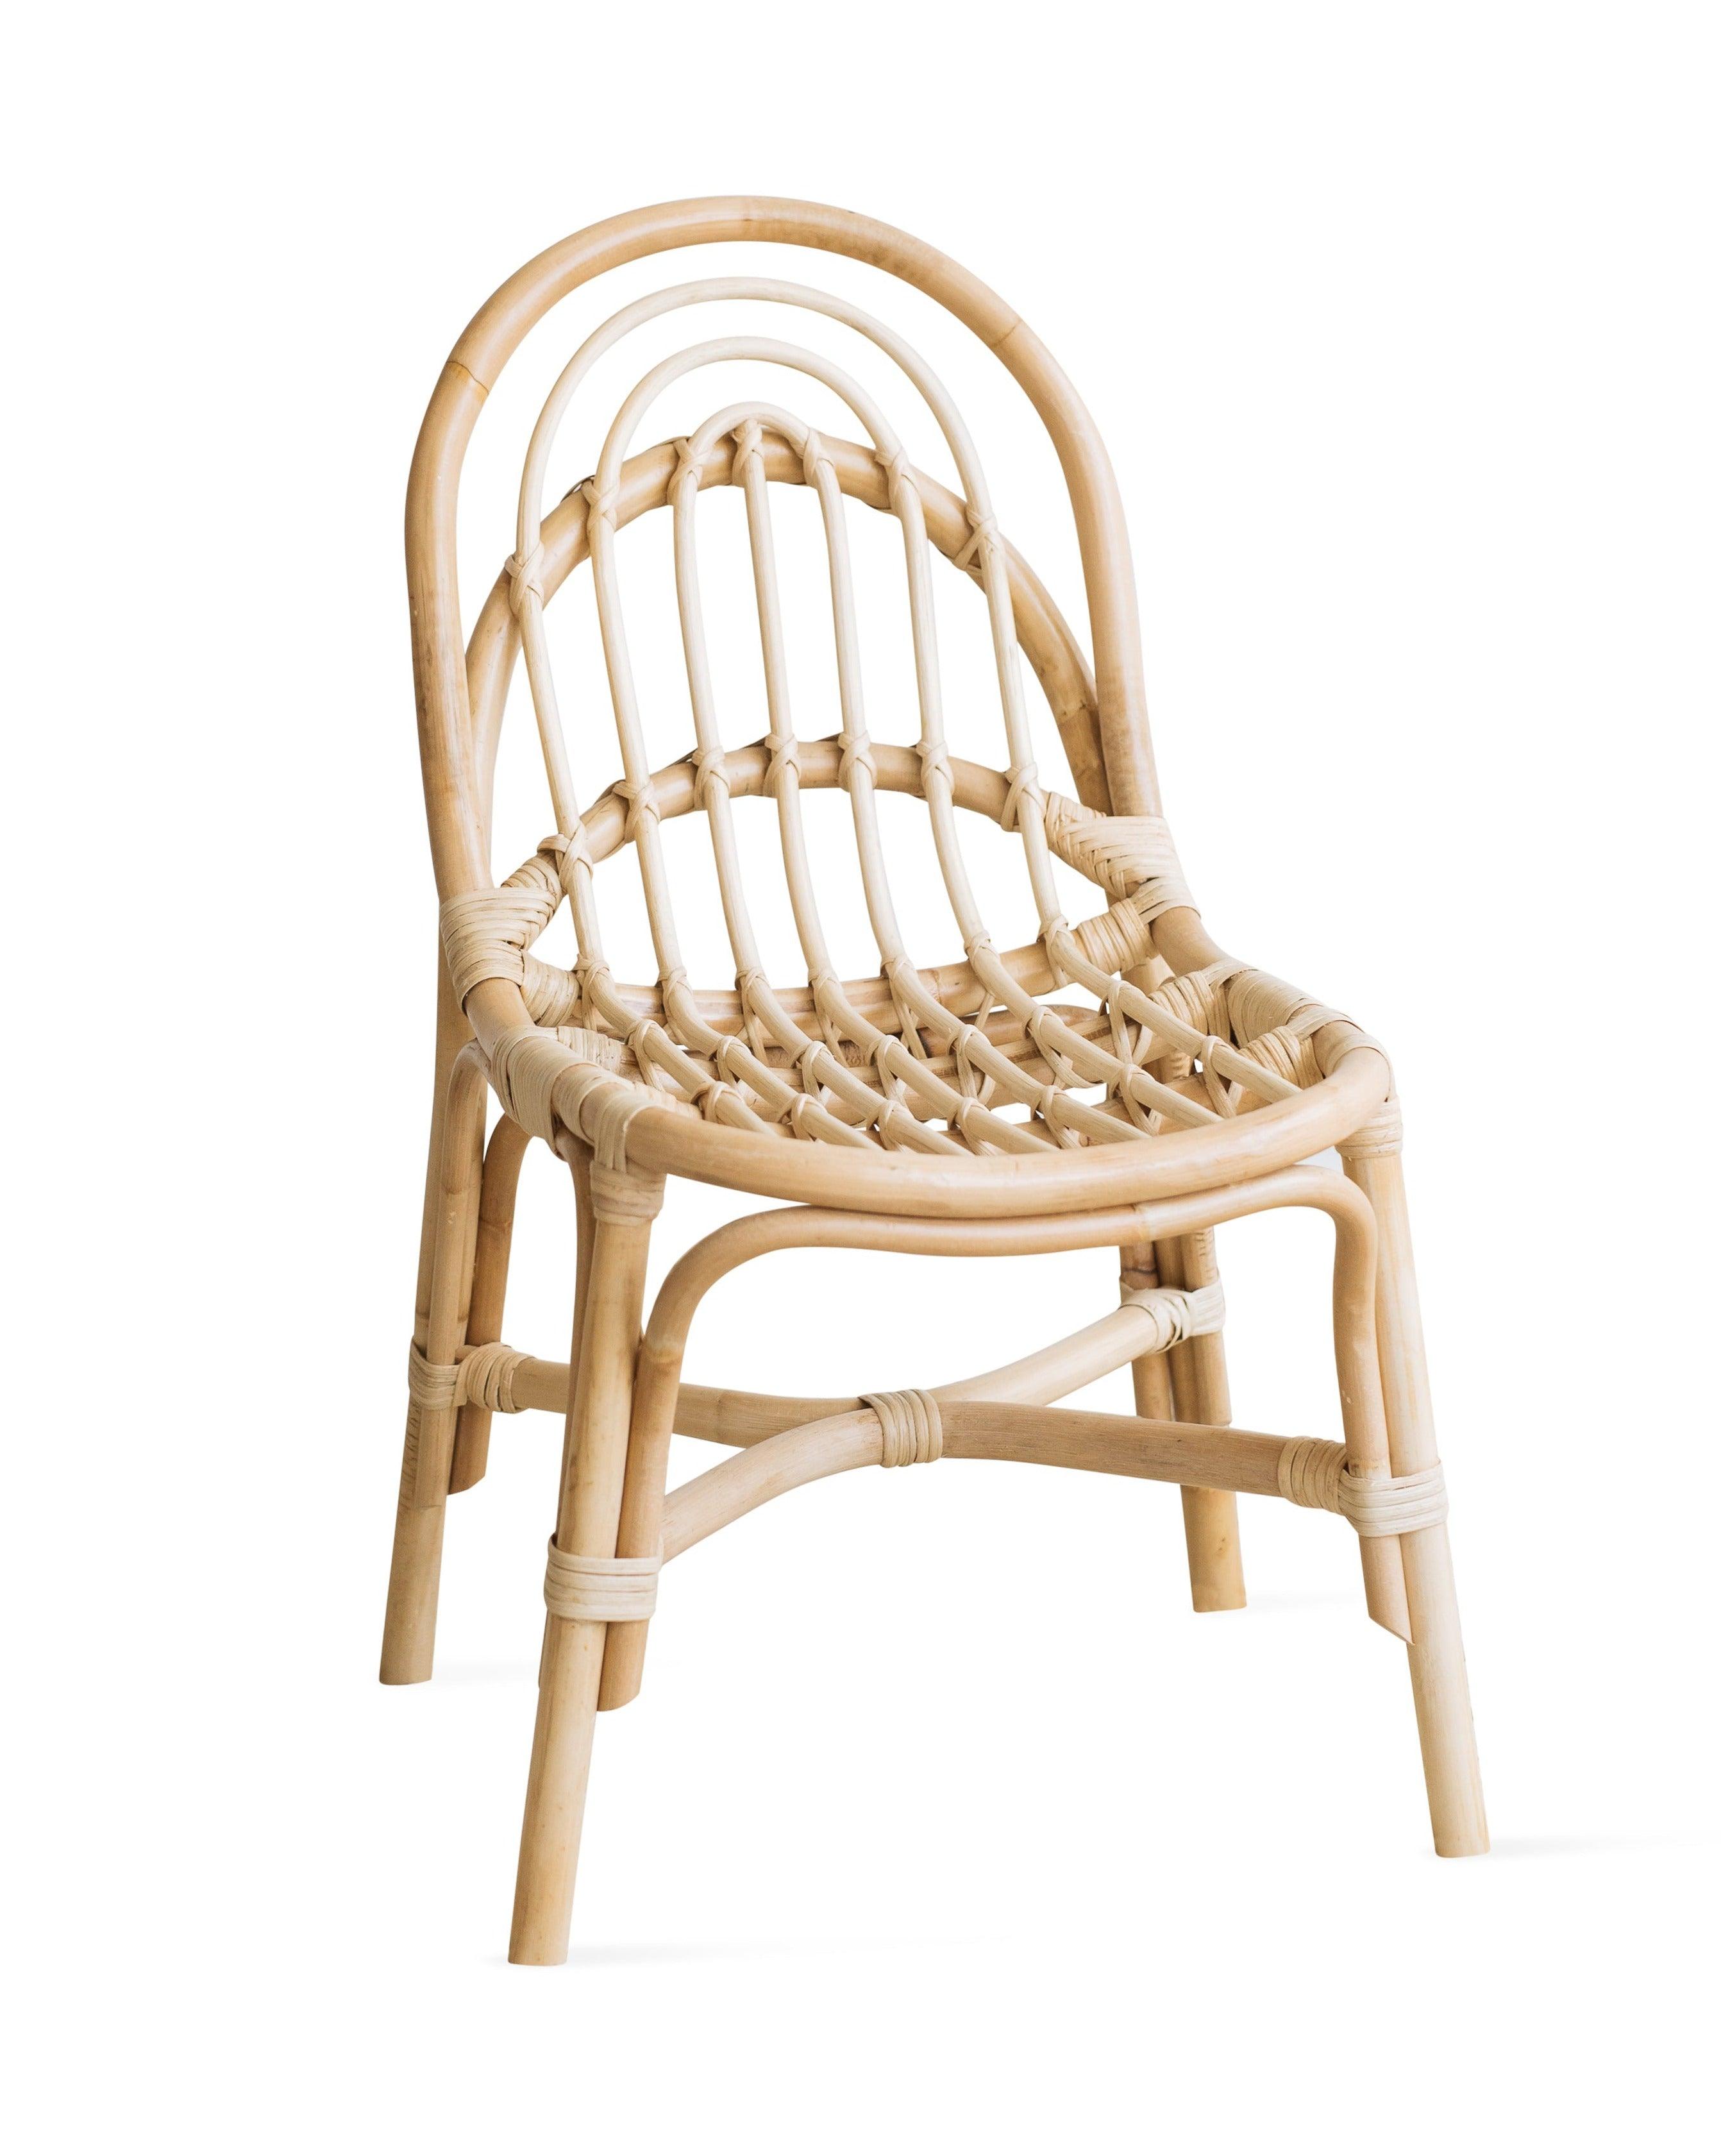 Beckett Kids Chair - Why and Whale